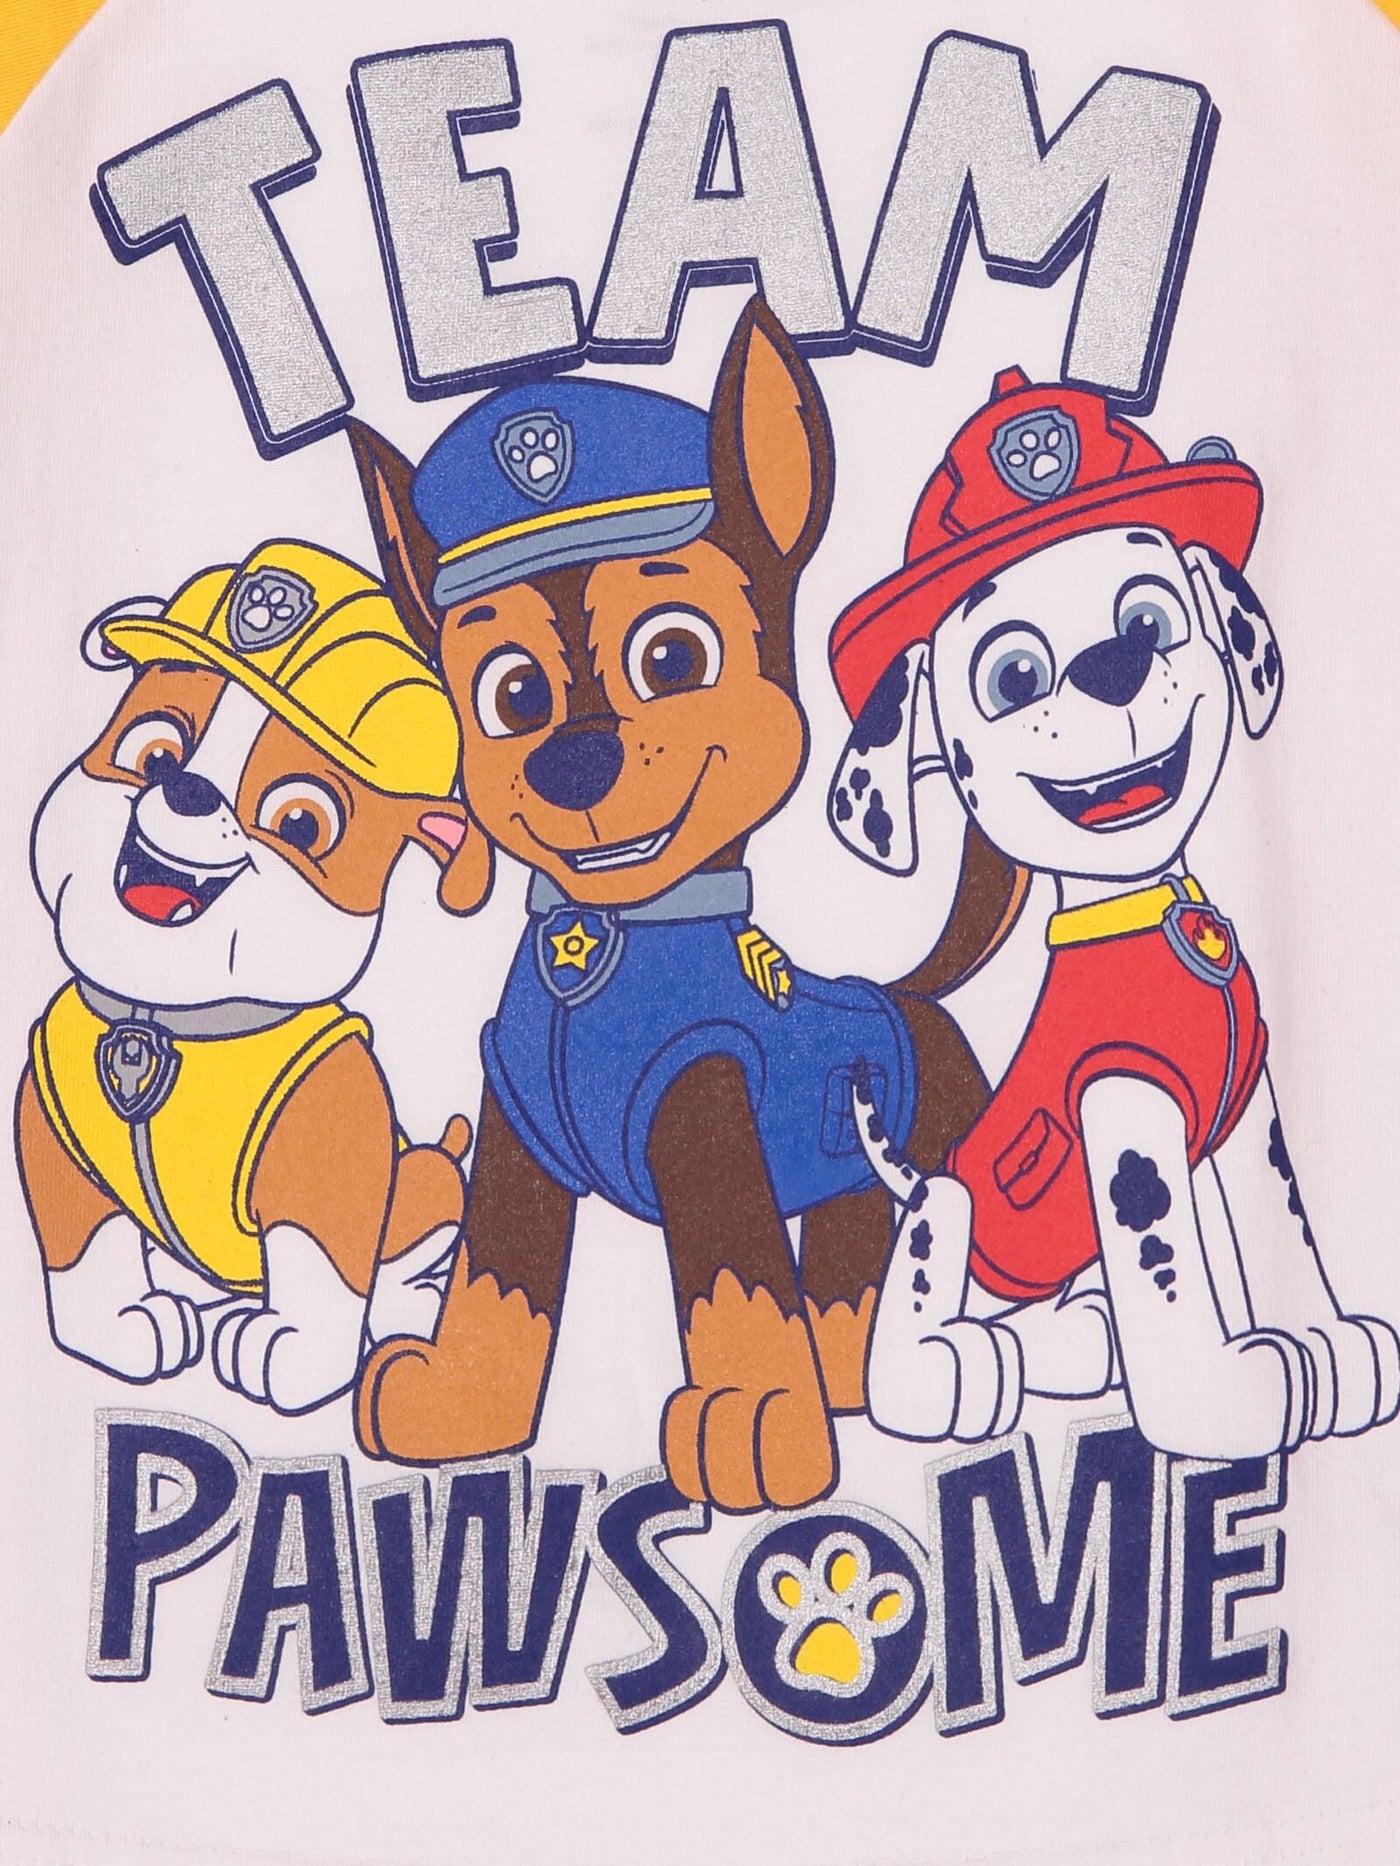 Nickelodeon Paw Patrol Pullover T-Shirt and French Terry Shorts Outfit Set